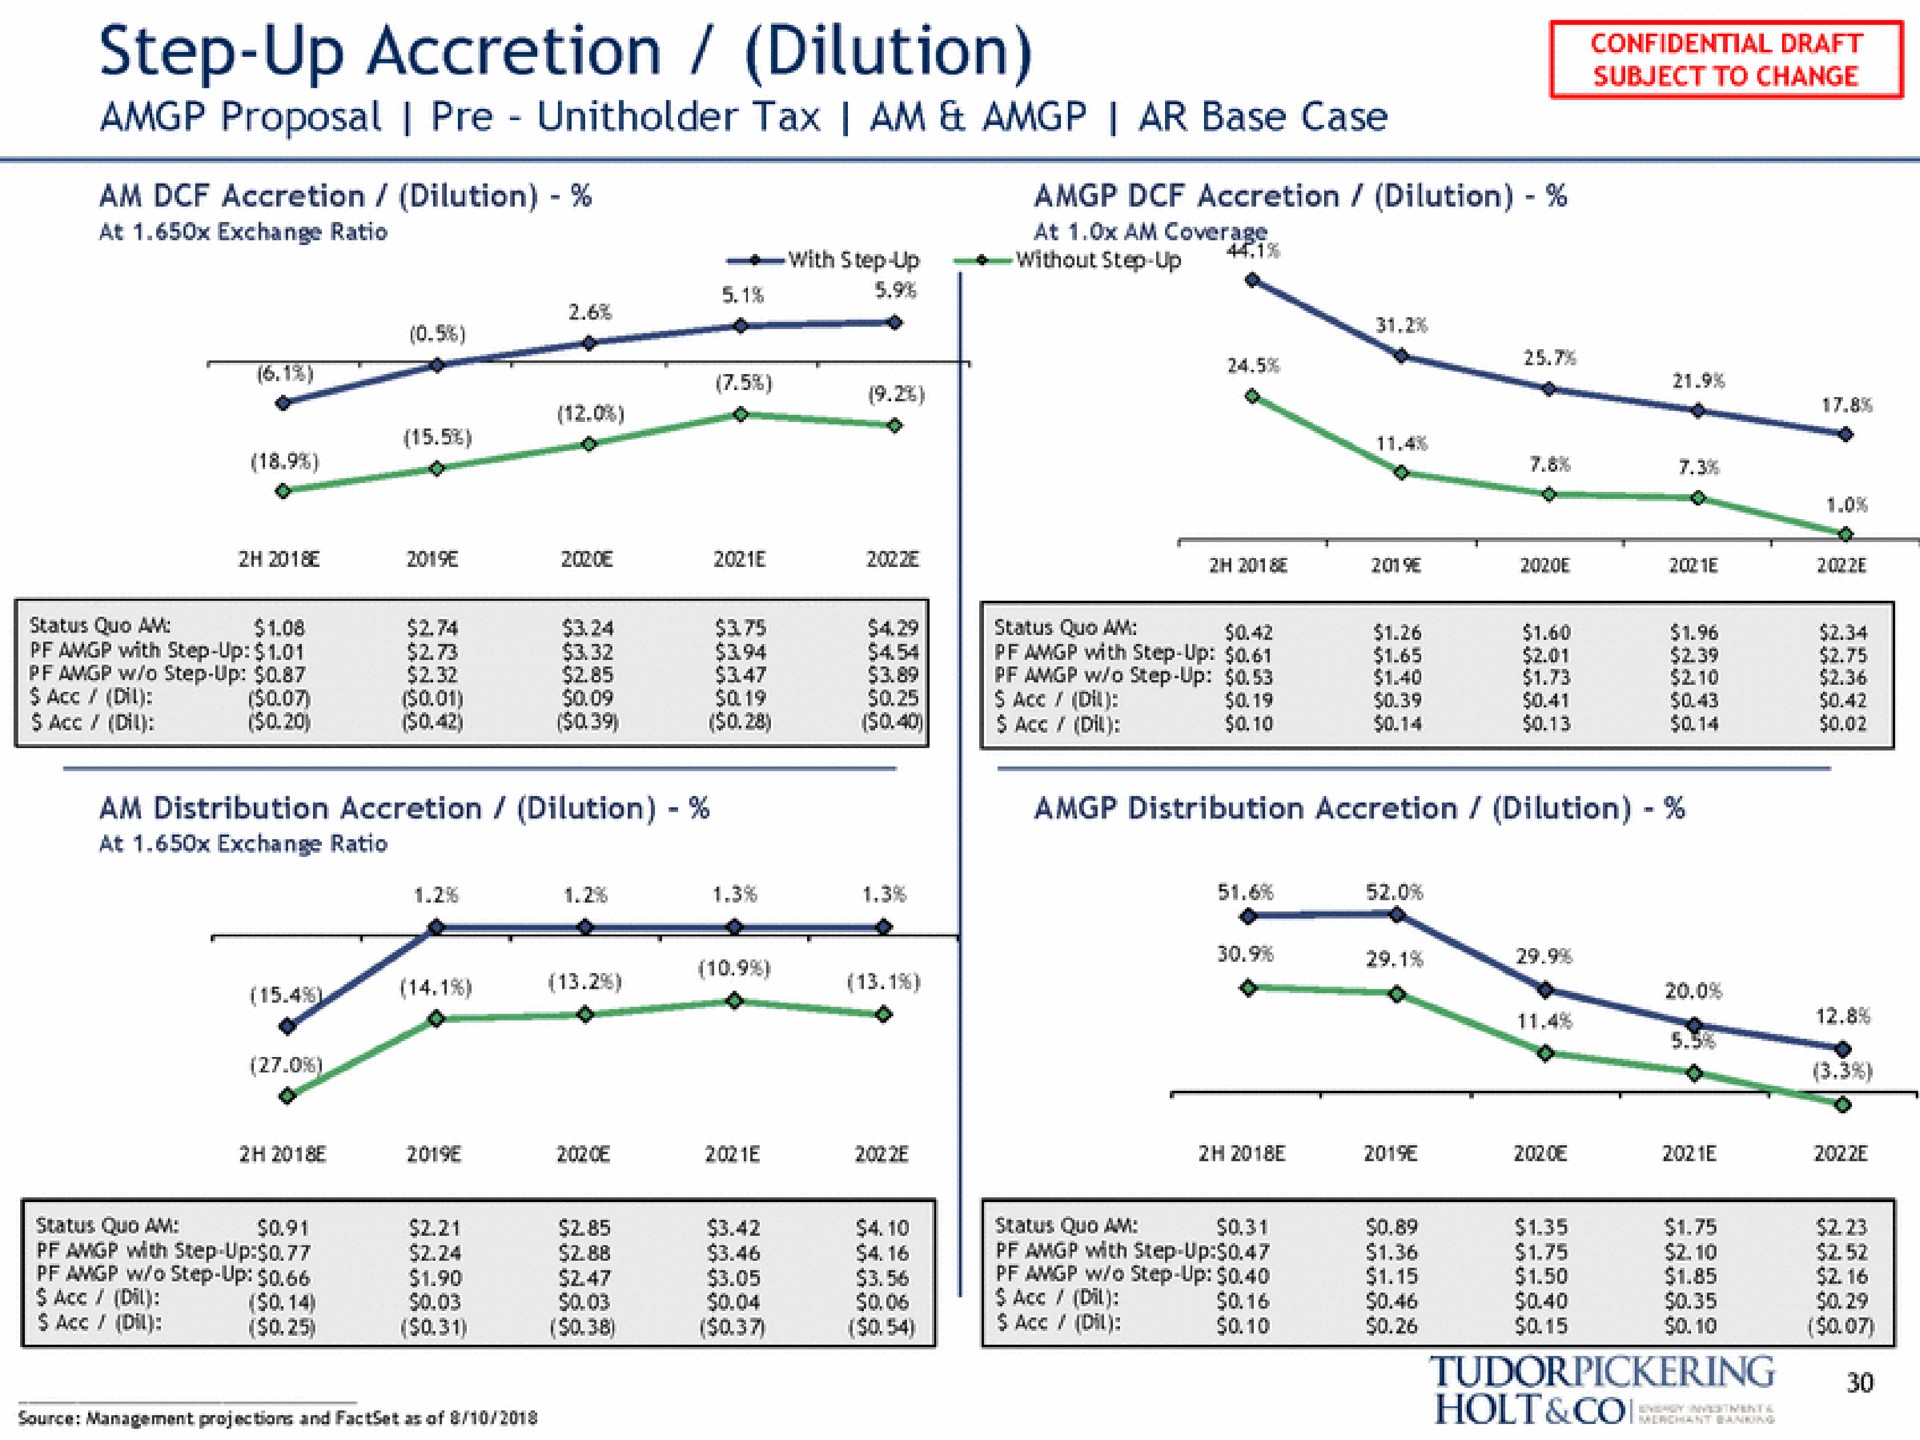 step up accretion dilution proposal tax am base case besa | Tudor, Pickering, Holt & Co